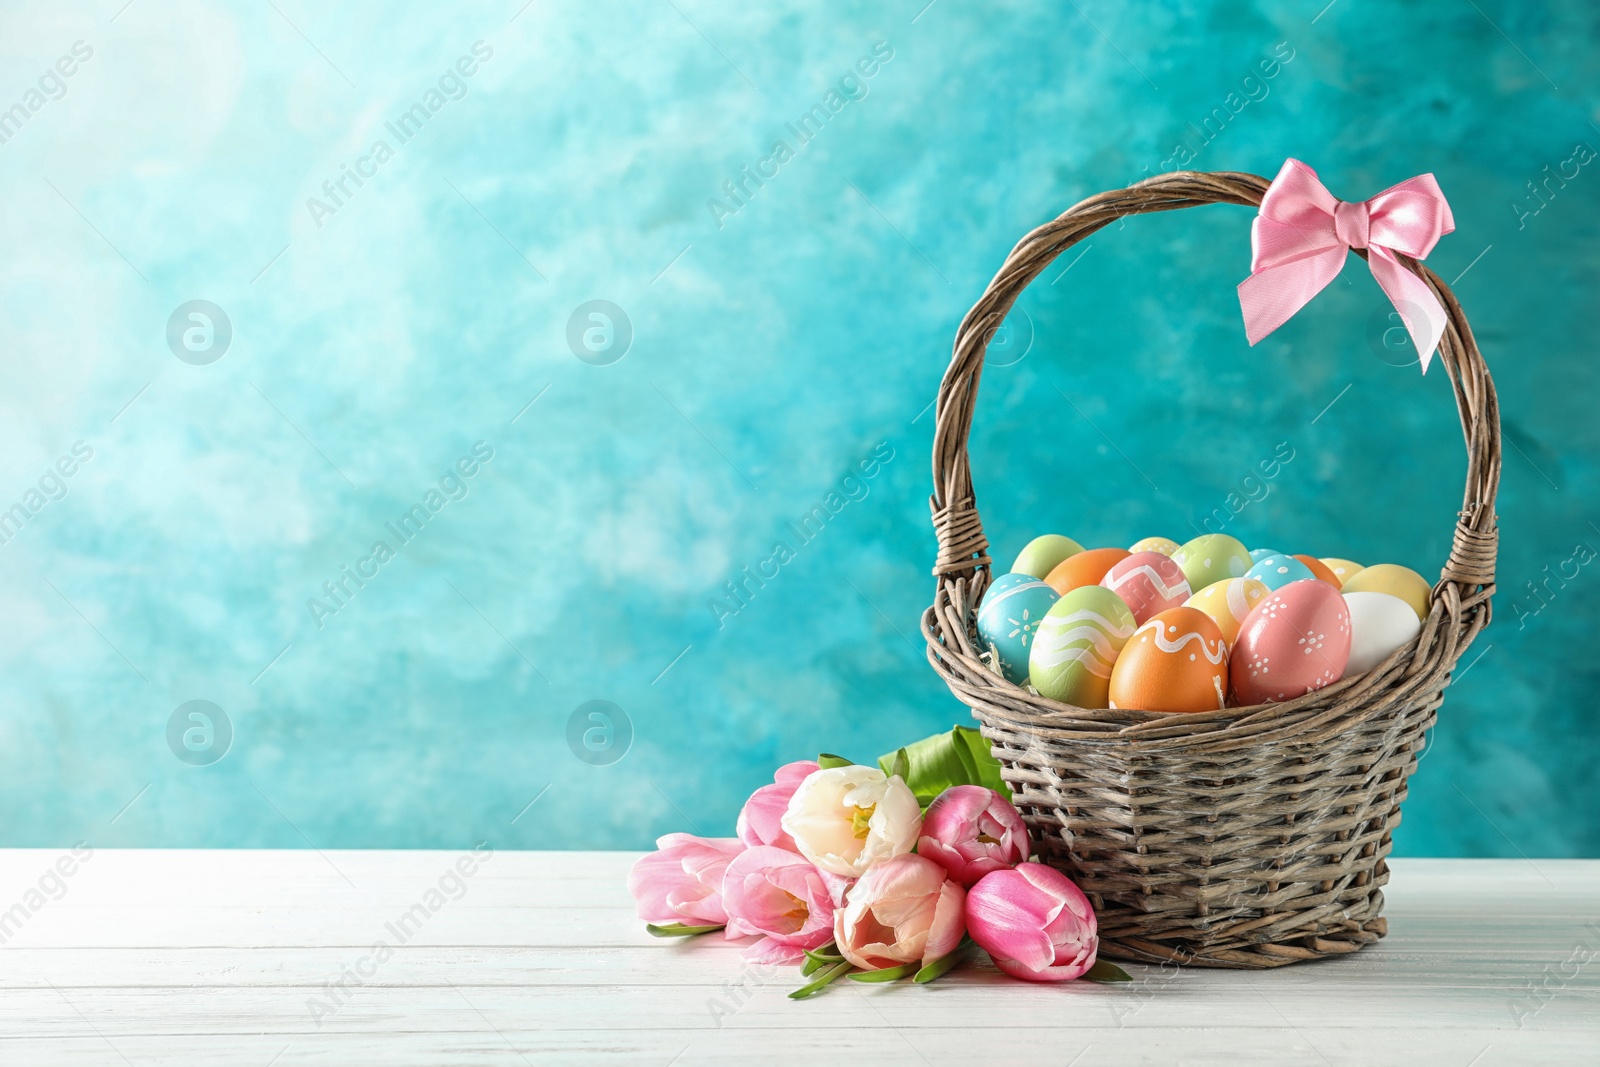 Photo of Wicker basket with painted Easter eggs and flowers on table against color background, space for text